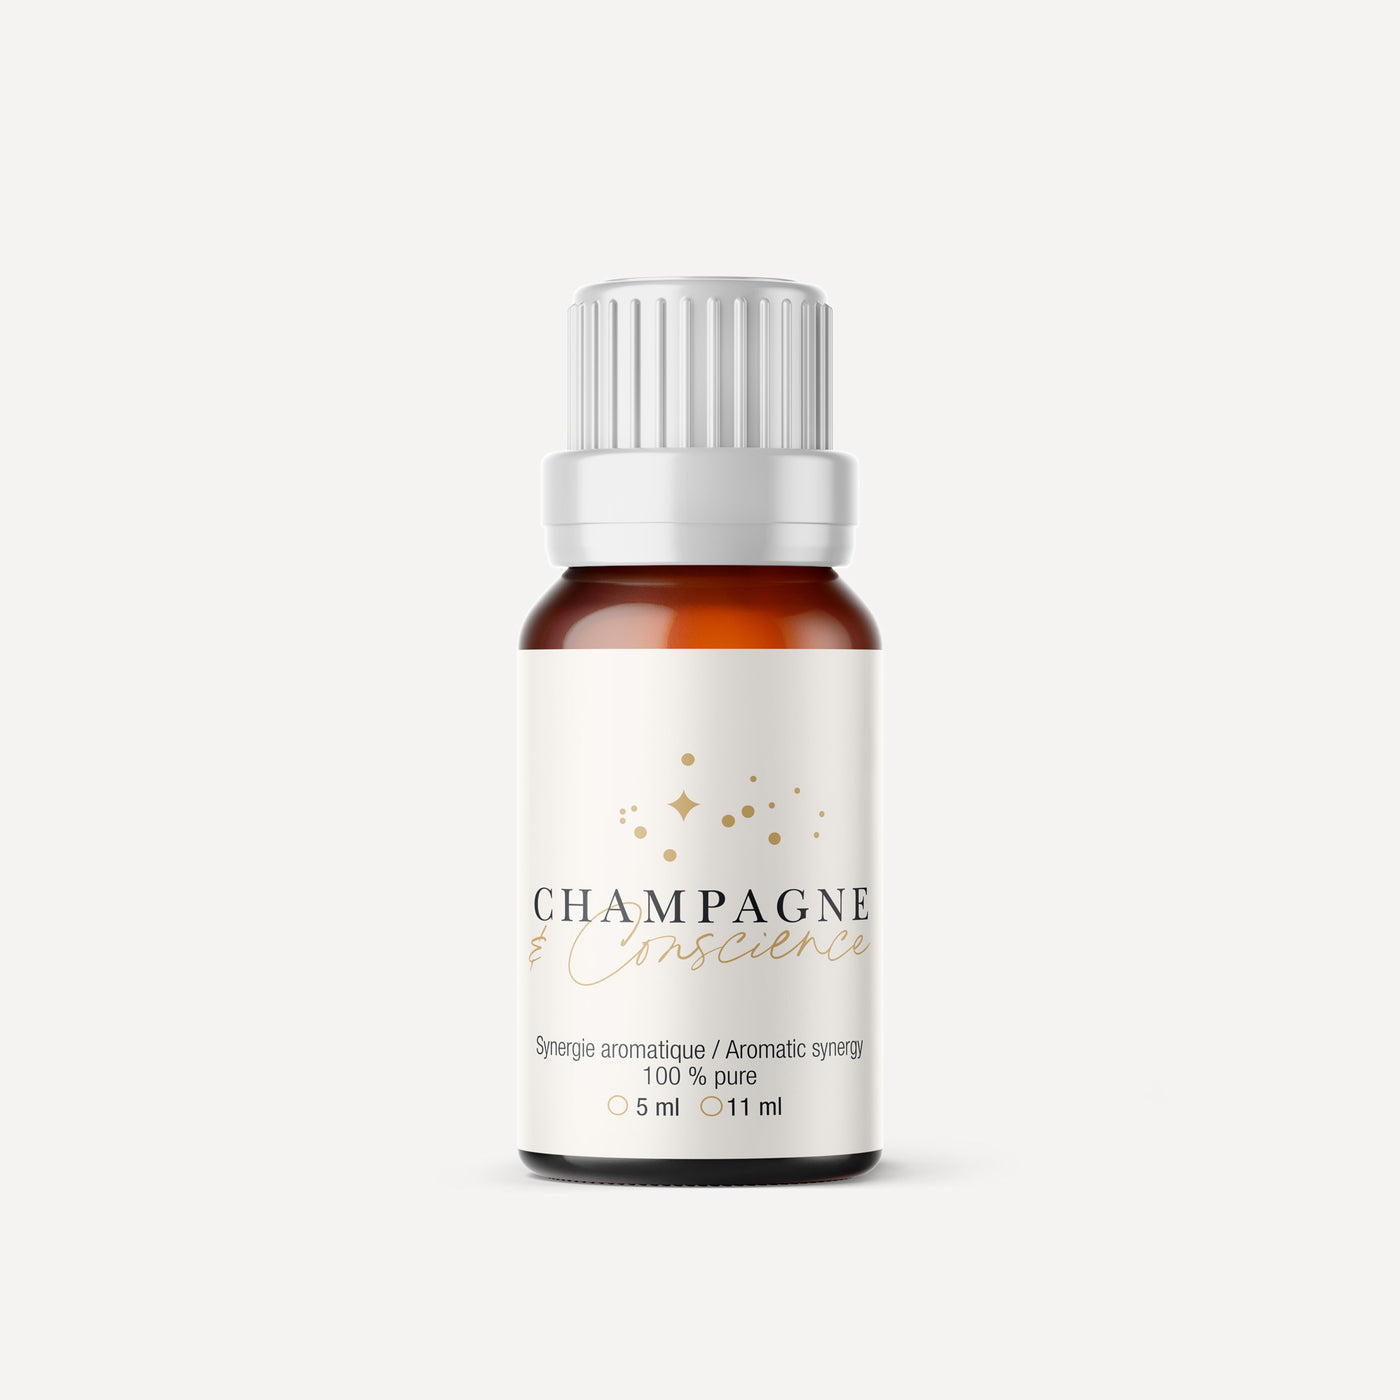 Champagne & Conscience - Synergie aromatique 100% pure